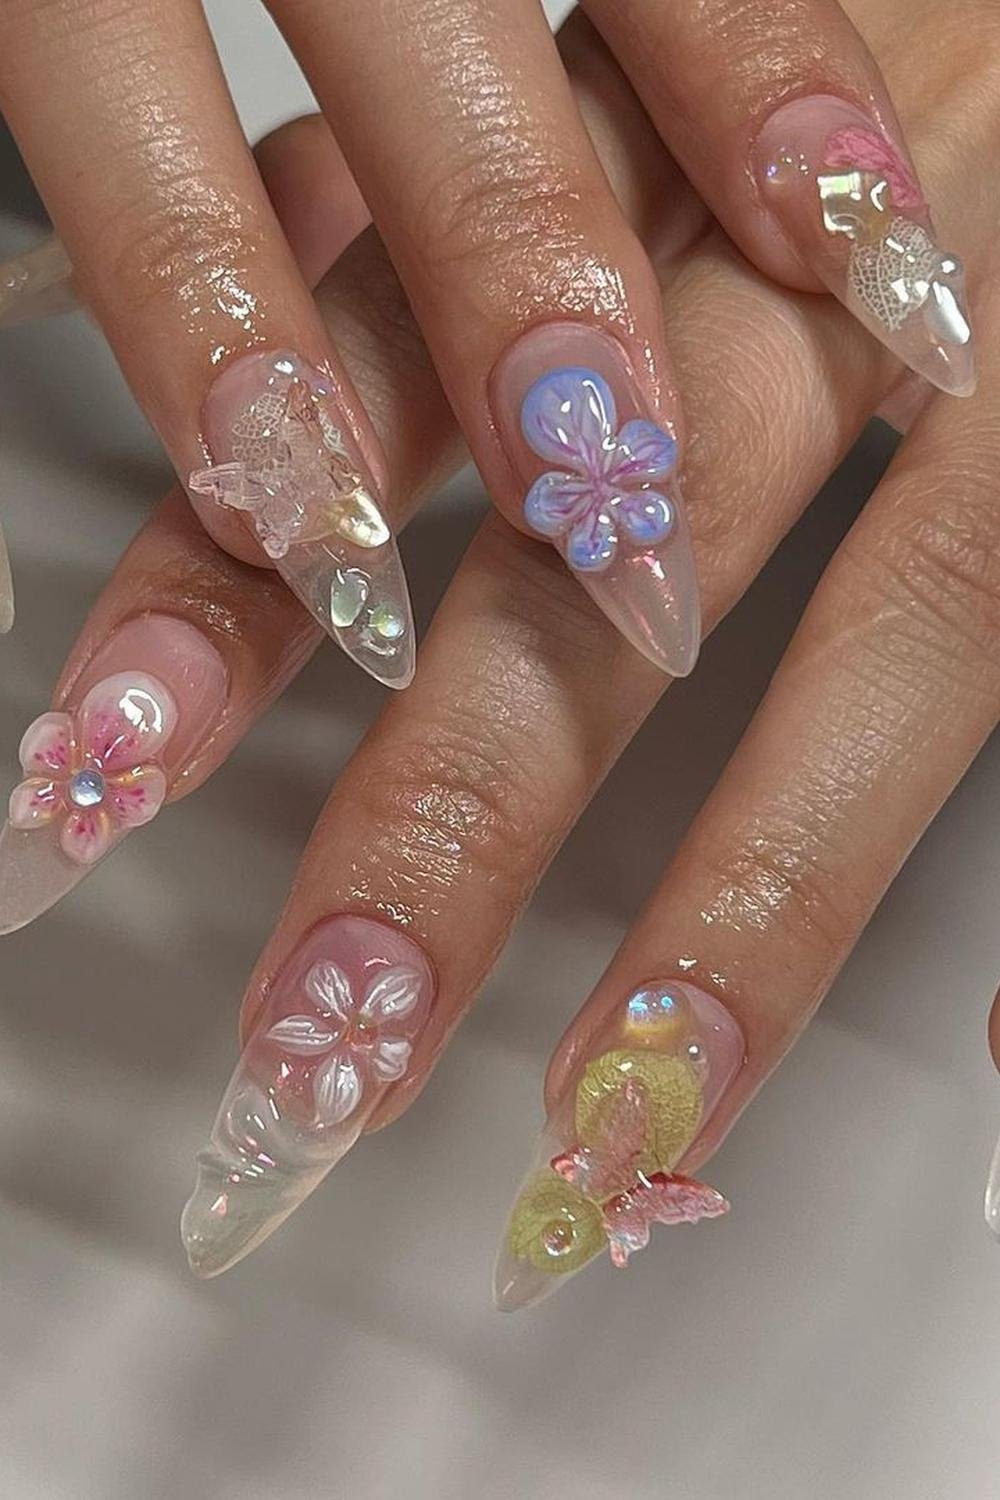 6 - Picture of Whimsical Nails